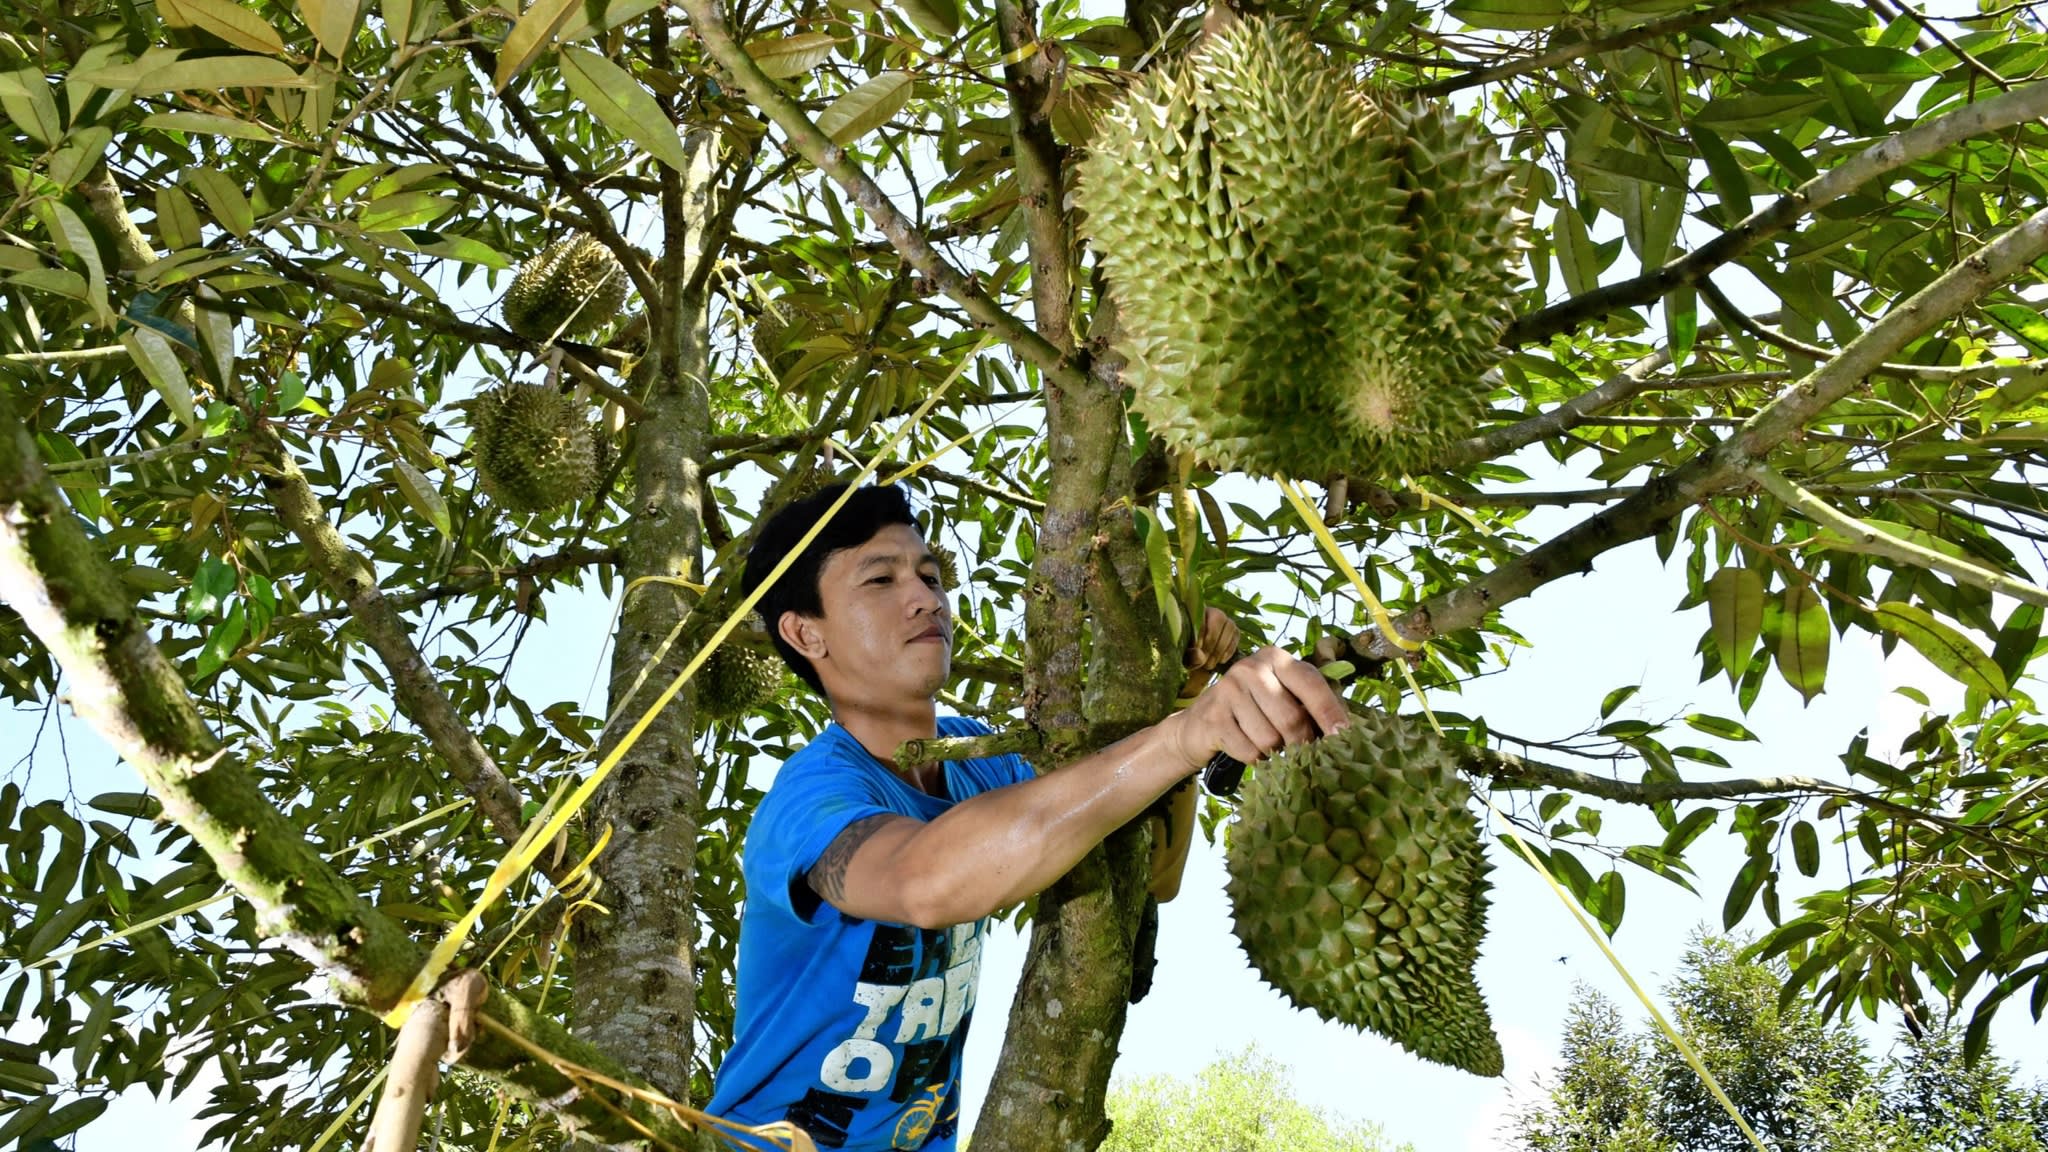 Thailand is losing the Chinese market for Durian and needs to find another country to sell their famous fruit to